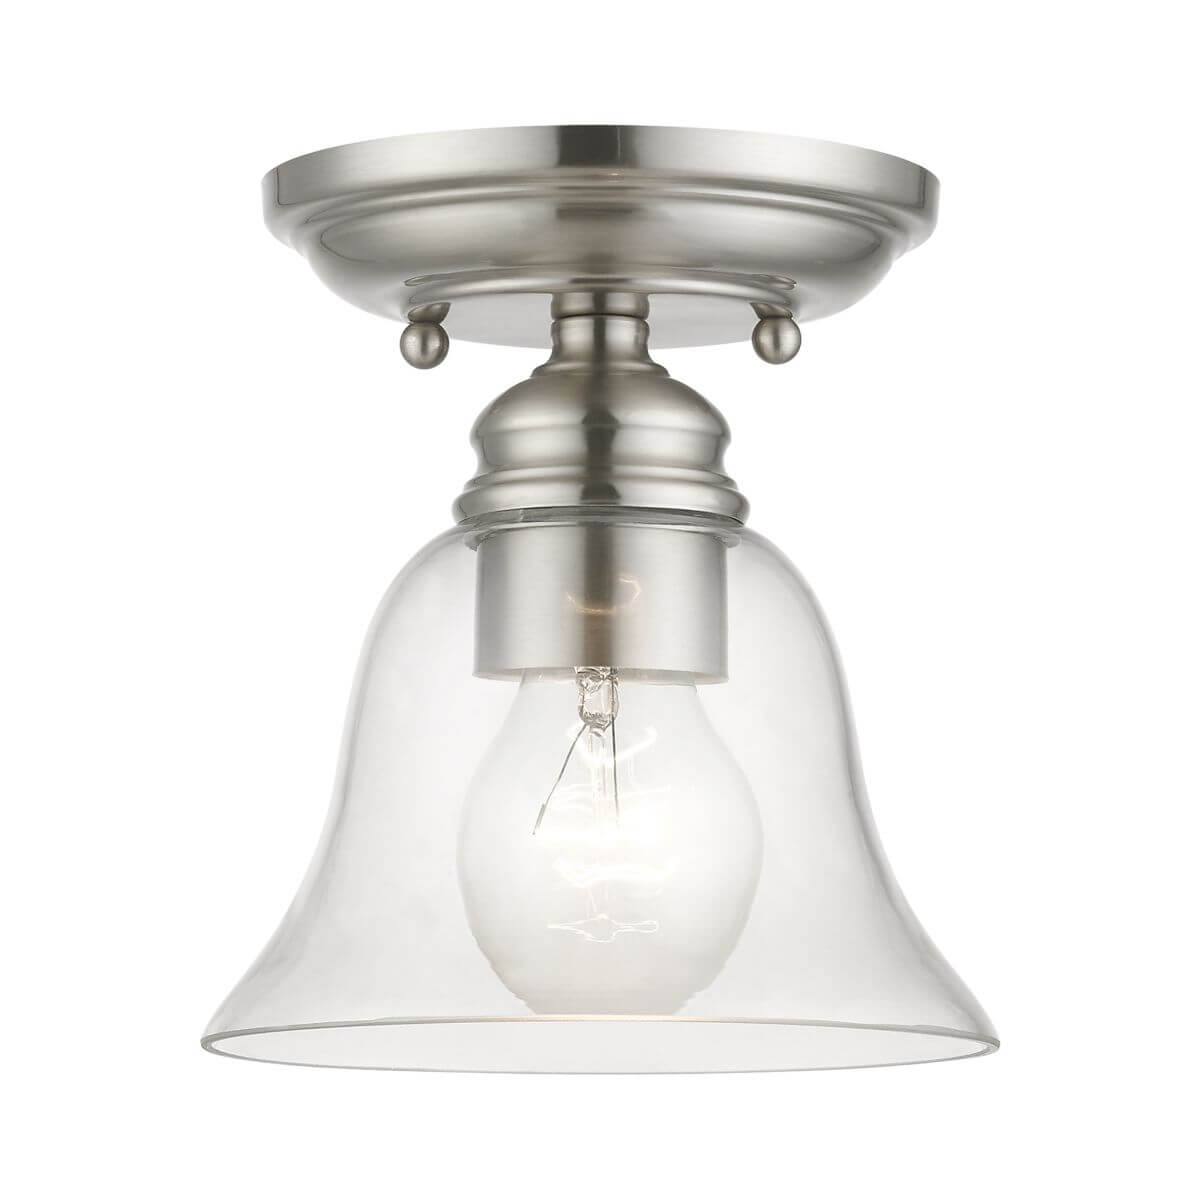 Livex 46481-91 Moreland 1 Light 6 inch Semi-Flush Mount in Brushed Nickel with Hand Blown Clear Glass